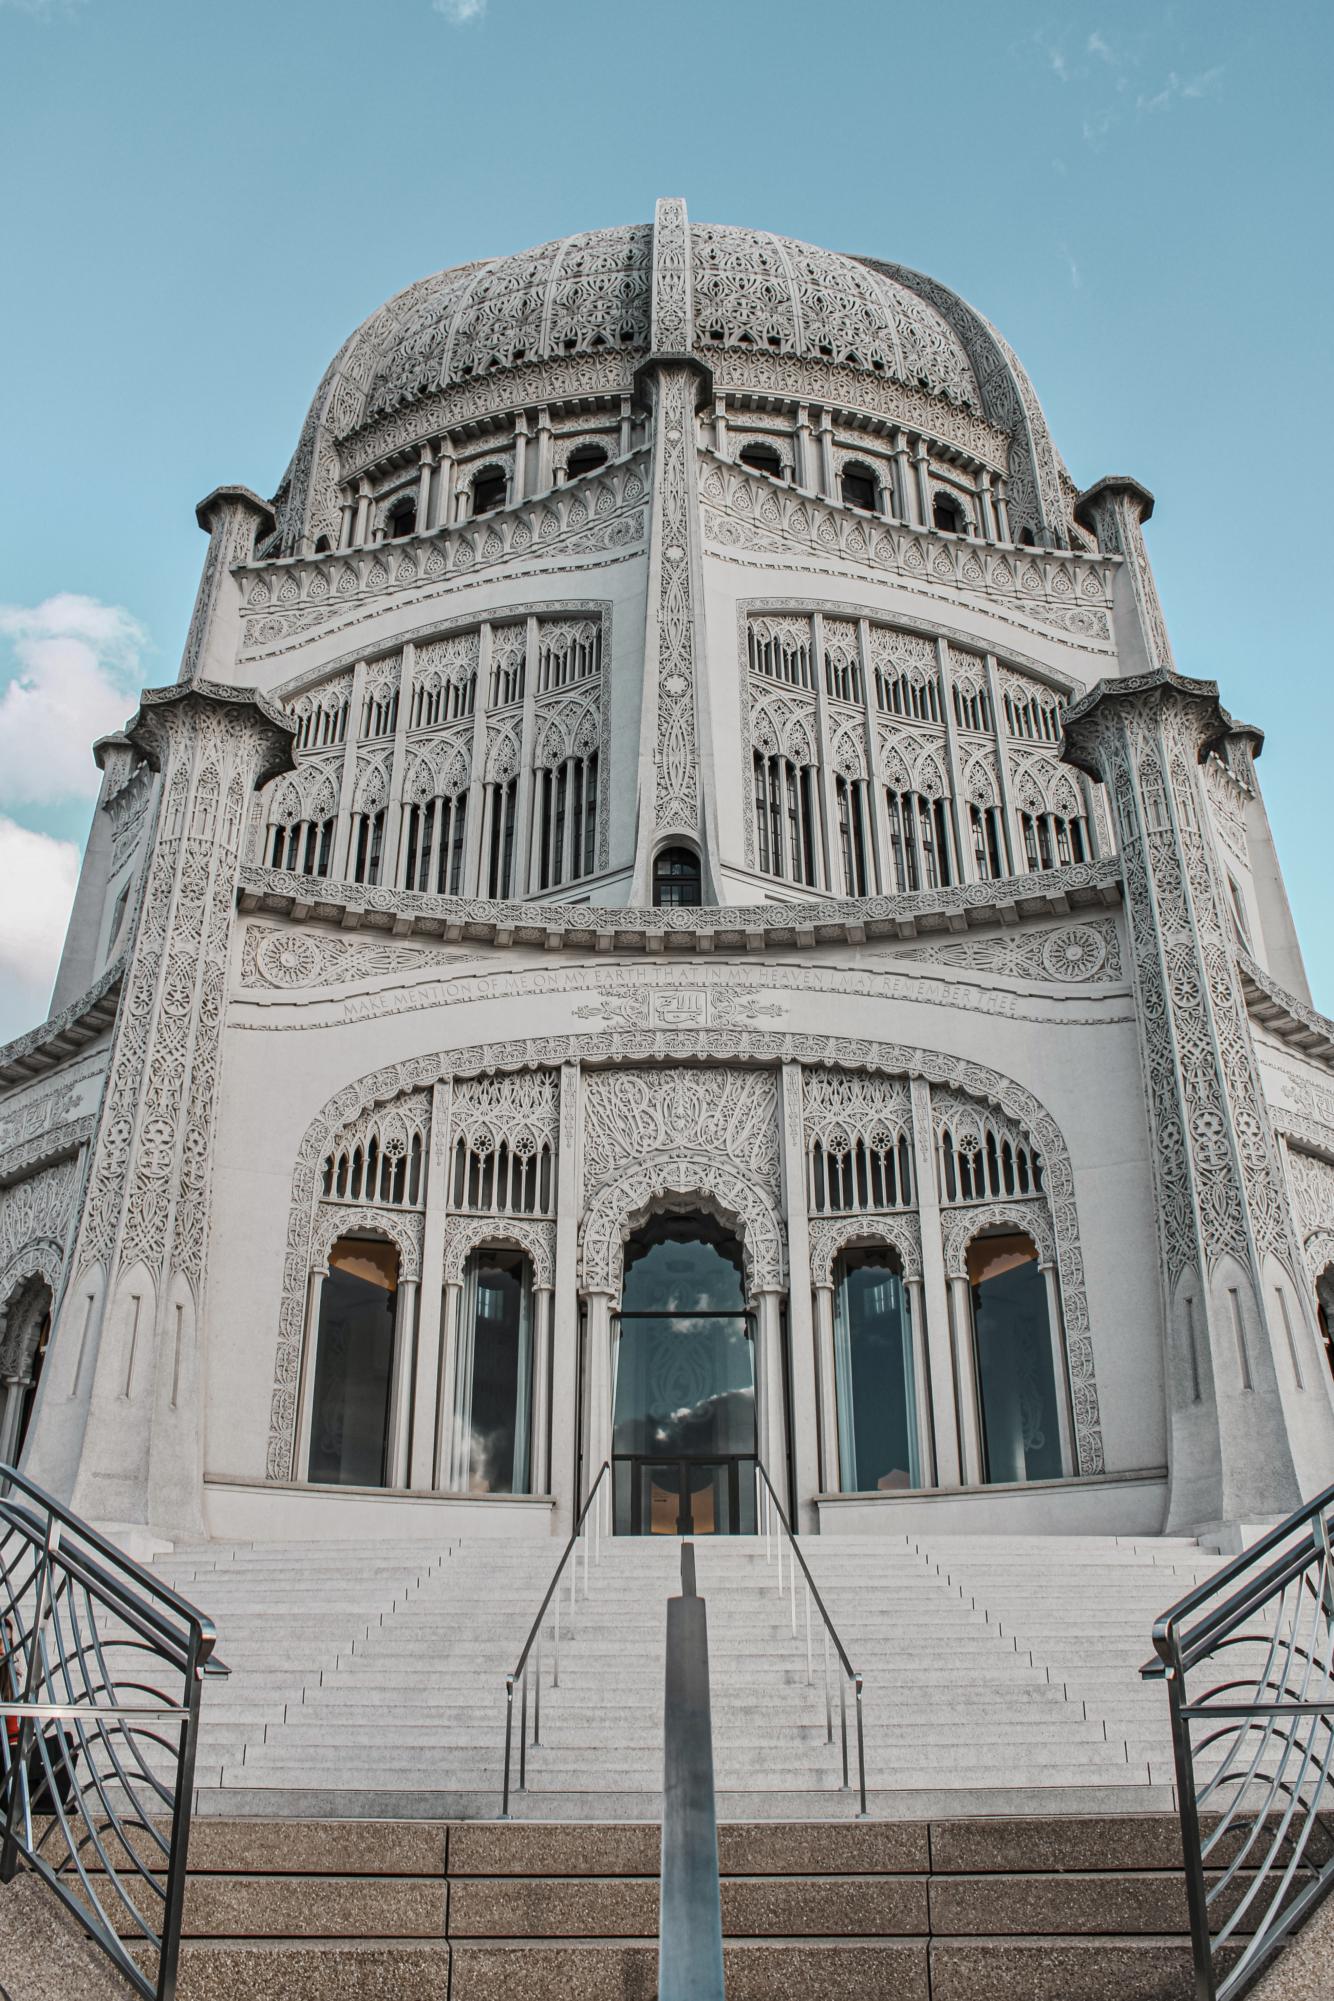 The Baha’i House of Worship in Wilmette